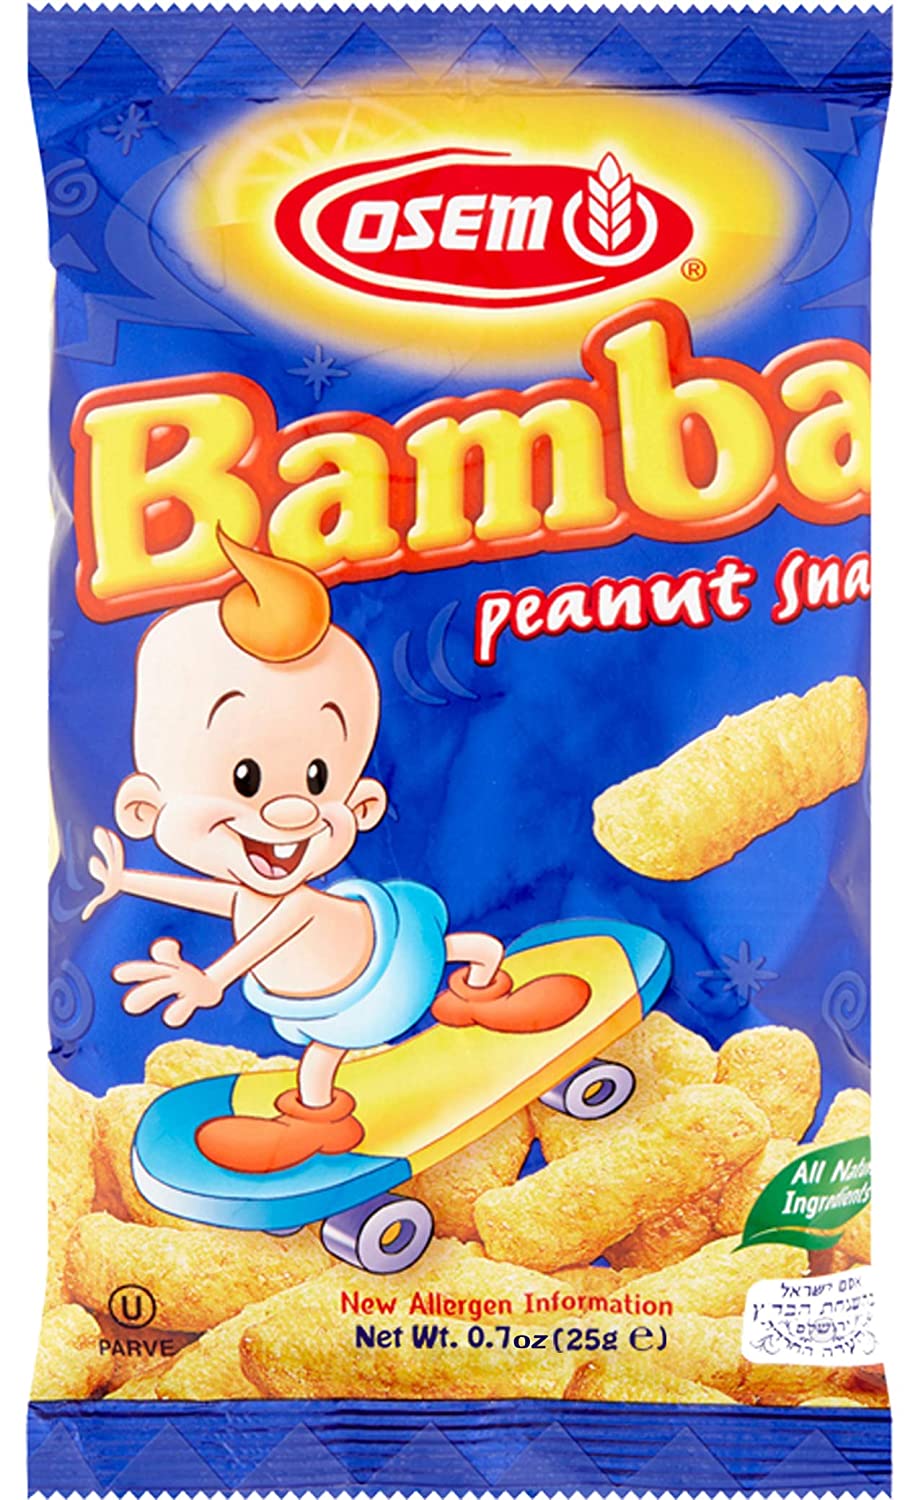 Bamba Peanut Snacks for Babies - All Natural Baby Peanut Puffs 6 Family Packs (Pack of 48 x 0.7oz Bags) - Peanut Butter Puffs made with 50% peanuts